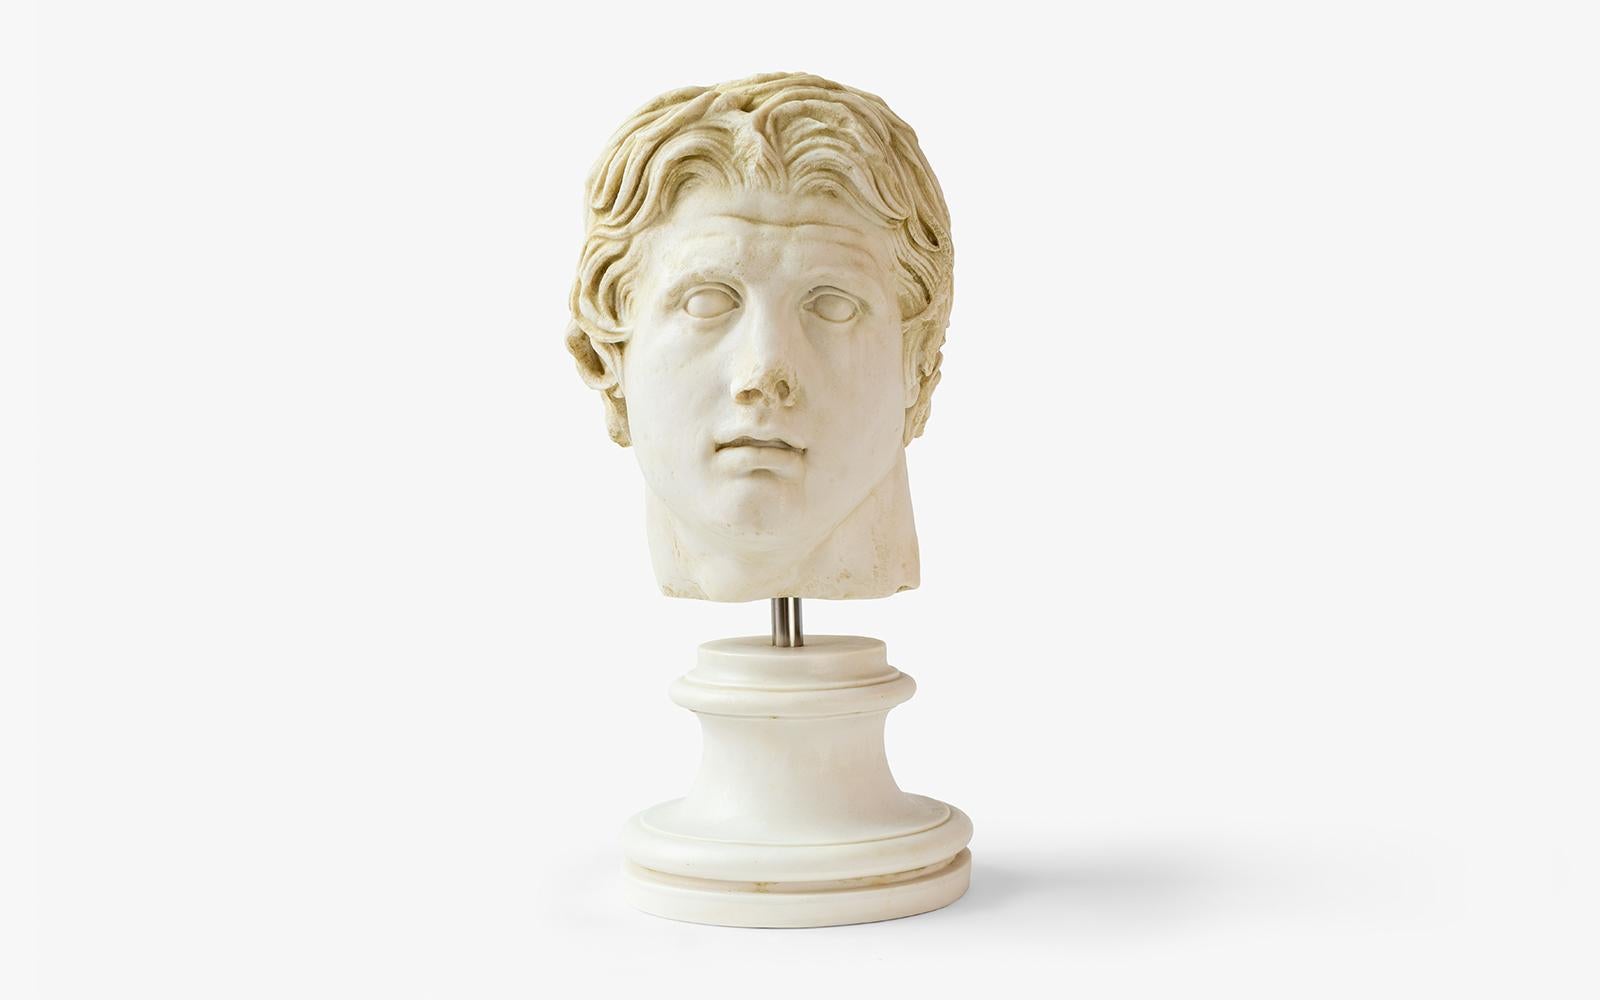 alexander the great full name